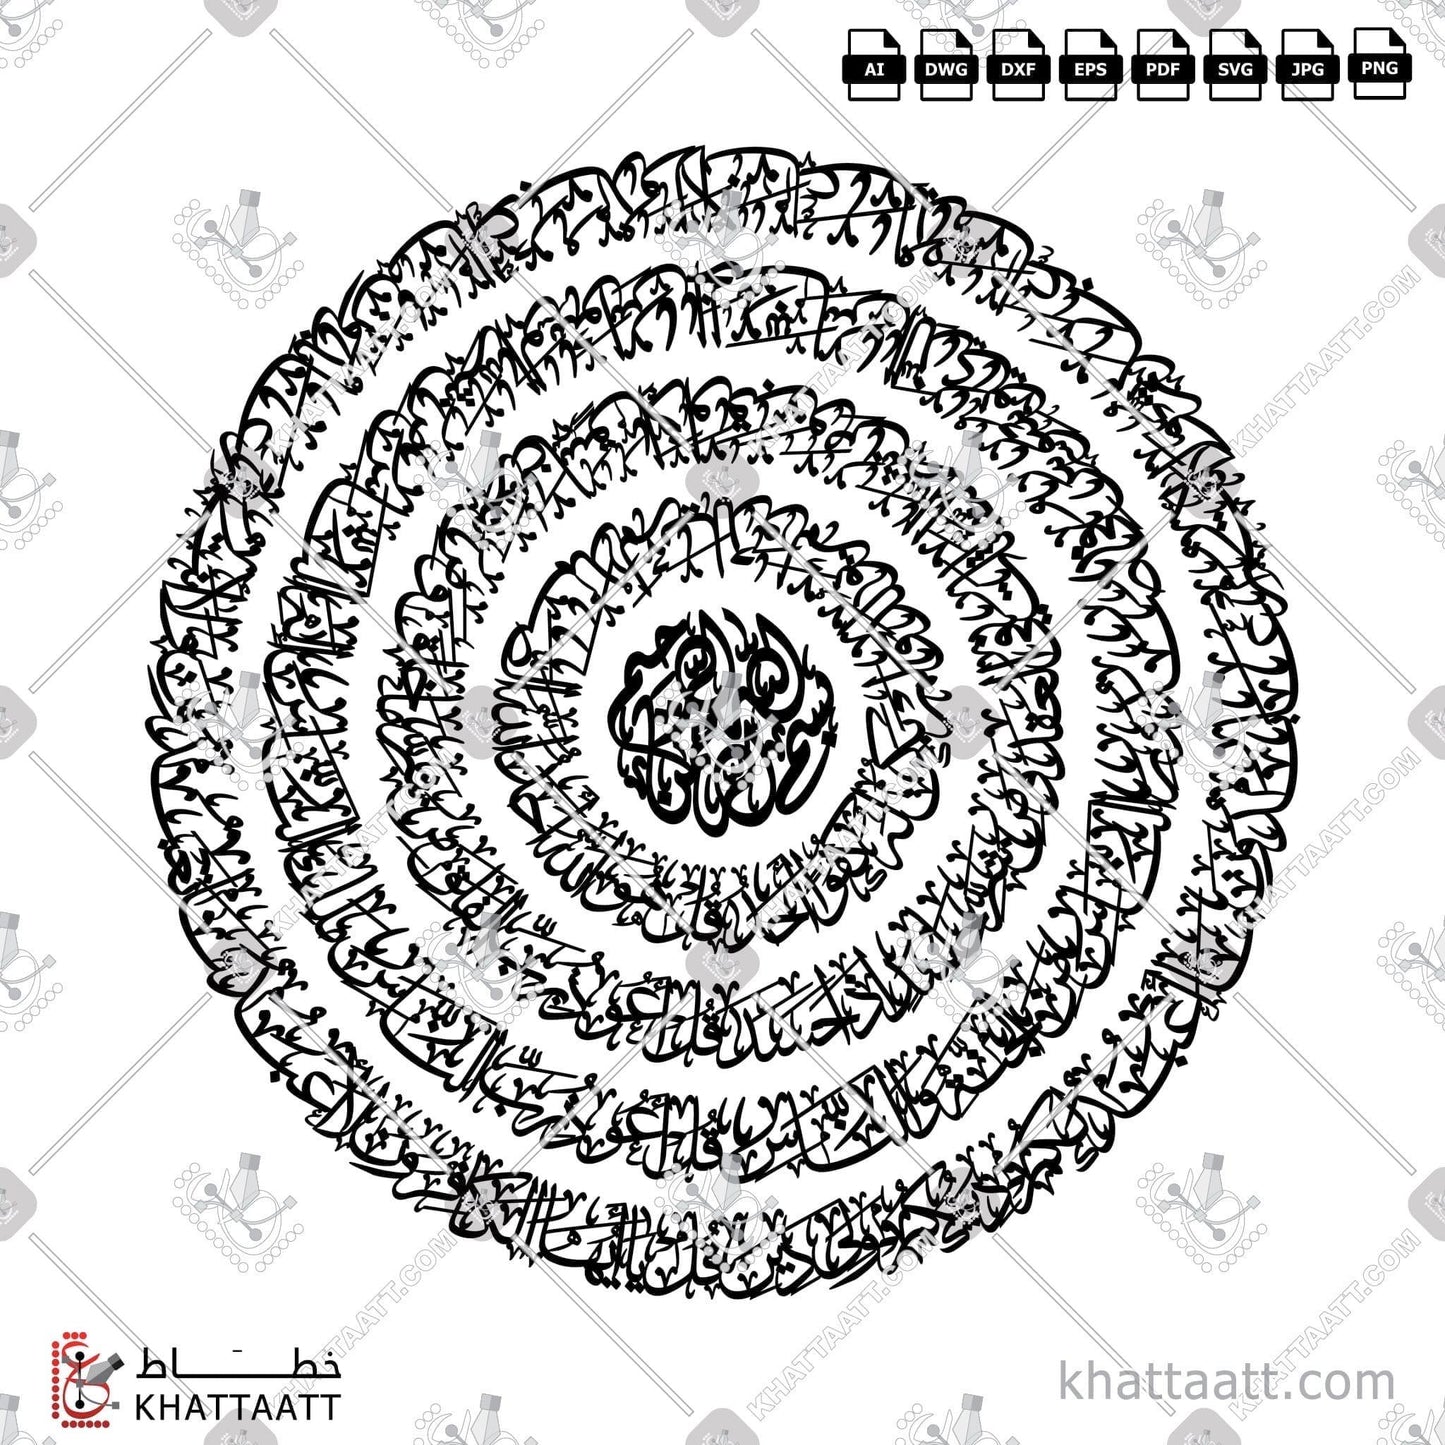 Download Arabic Calligraphy of The 4 Quls - القلاقل الأربعة in Thuluth - خط الثلث in vector and .png